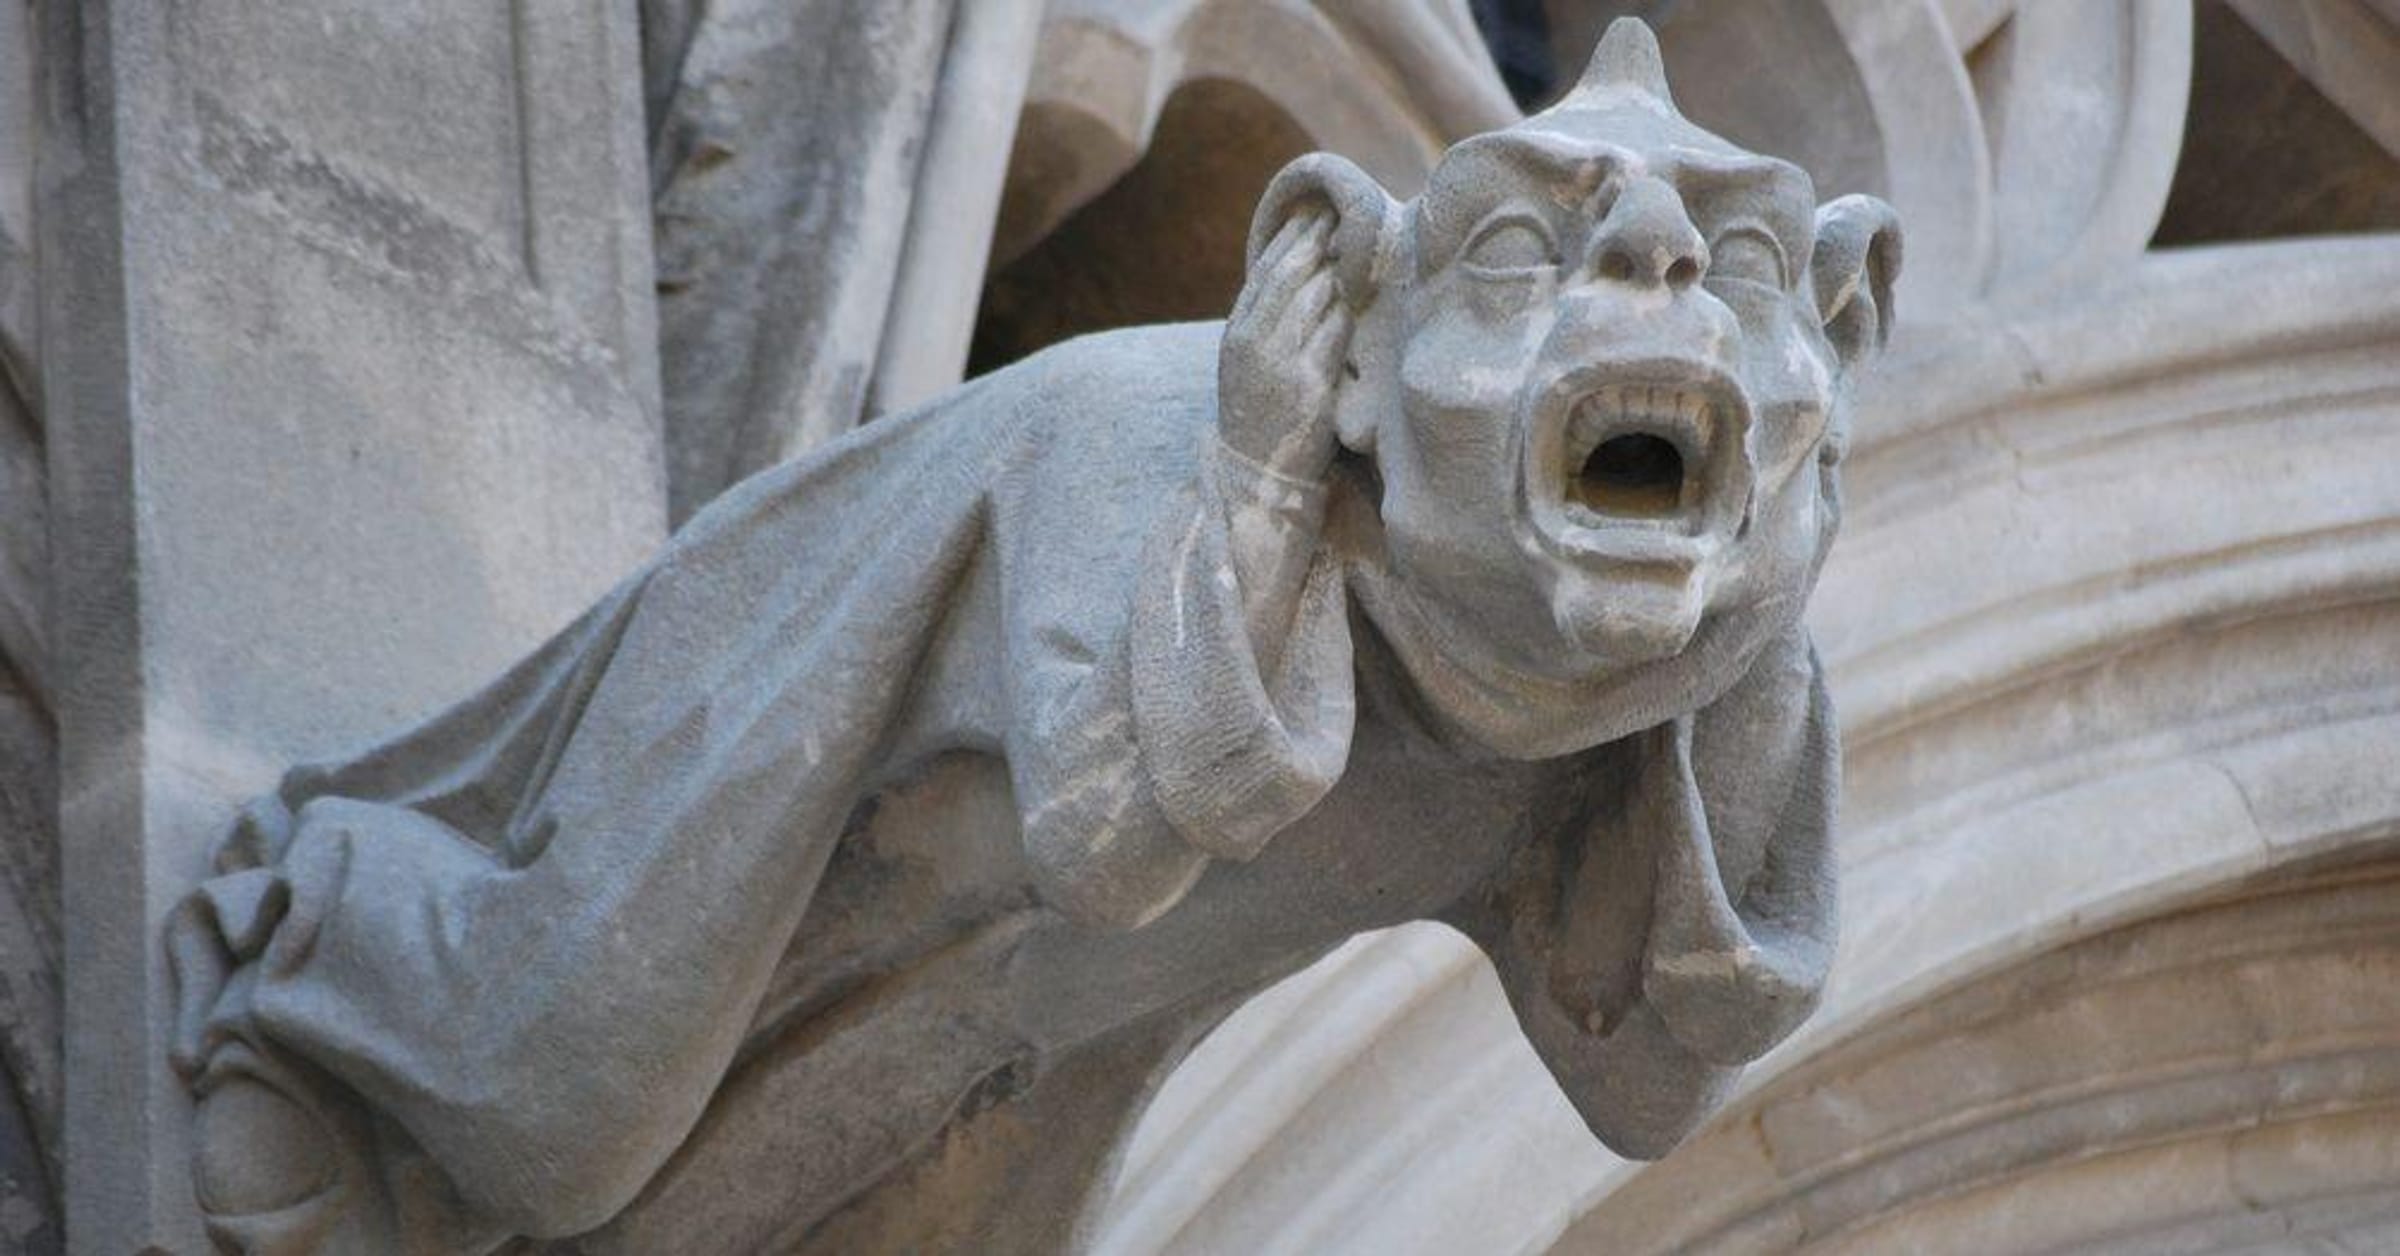 Bizarre story behind 600-year-old statue of gargoyle giving